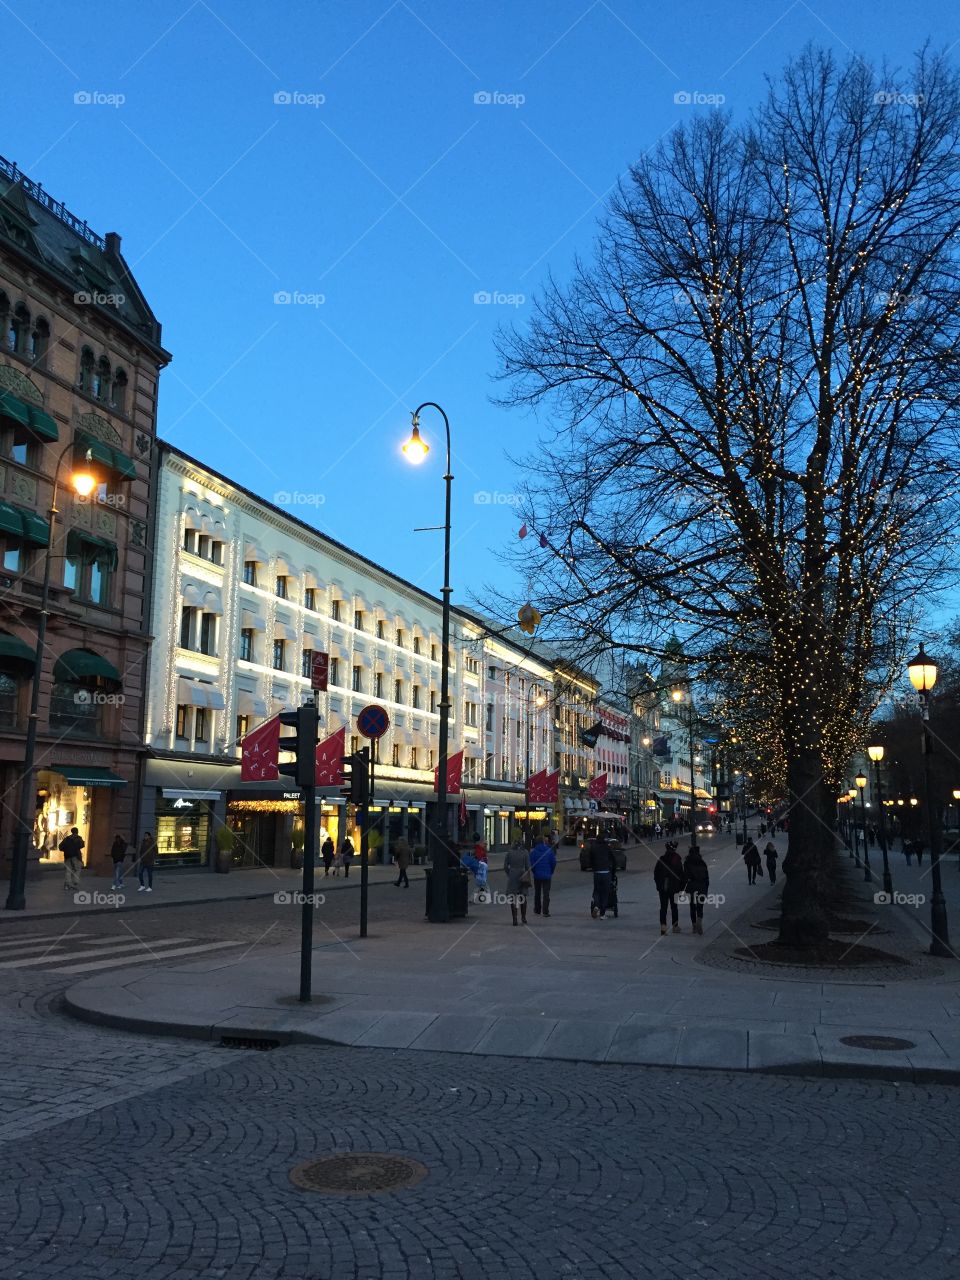 Oslo Norway during winter Christmas time